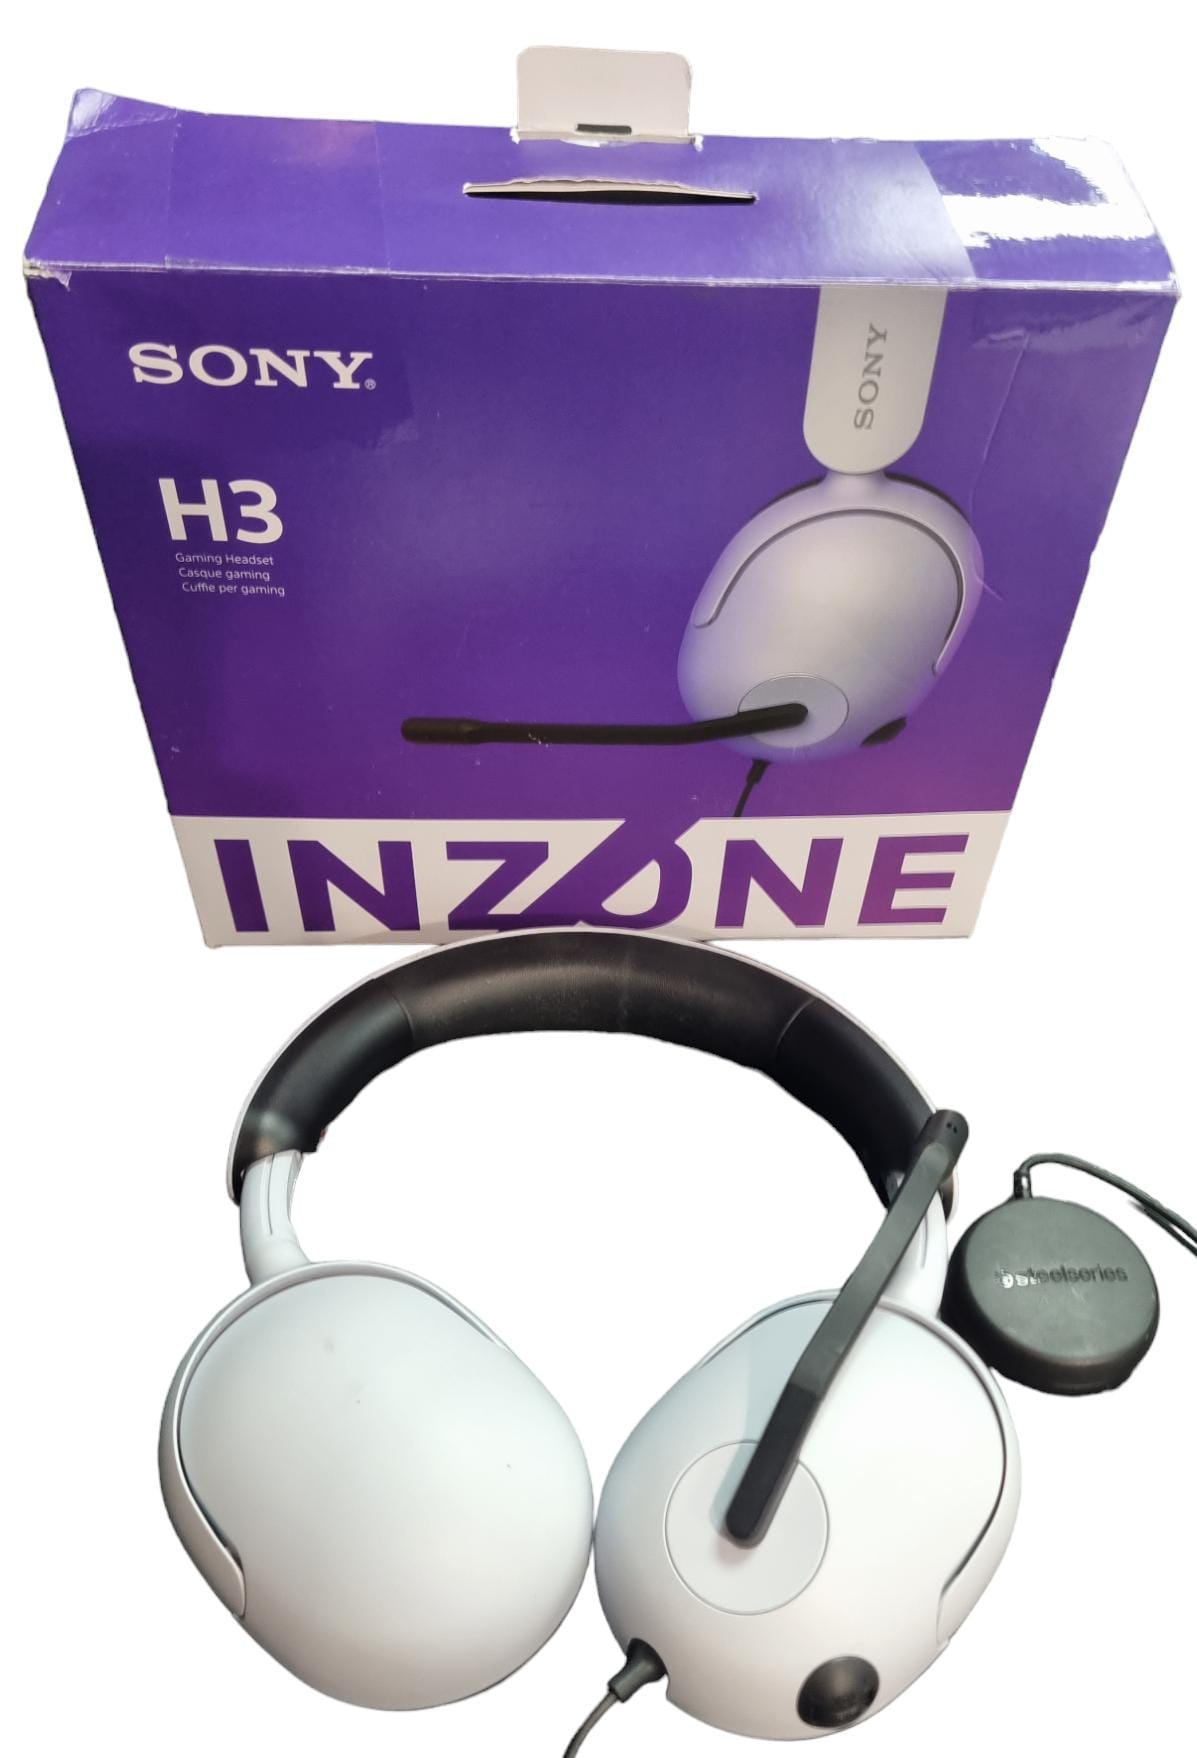 Sony INZONE H3 PS4, PS5, PC Wired Gaming Headset - White - Boxed